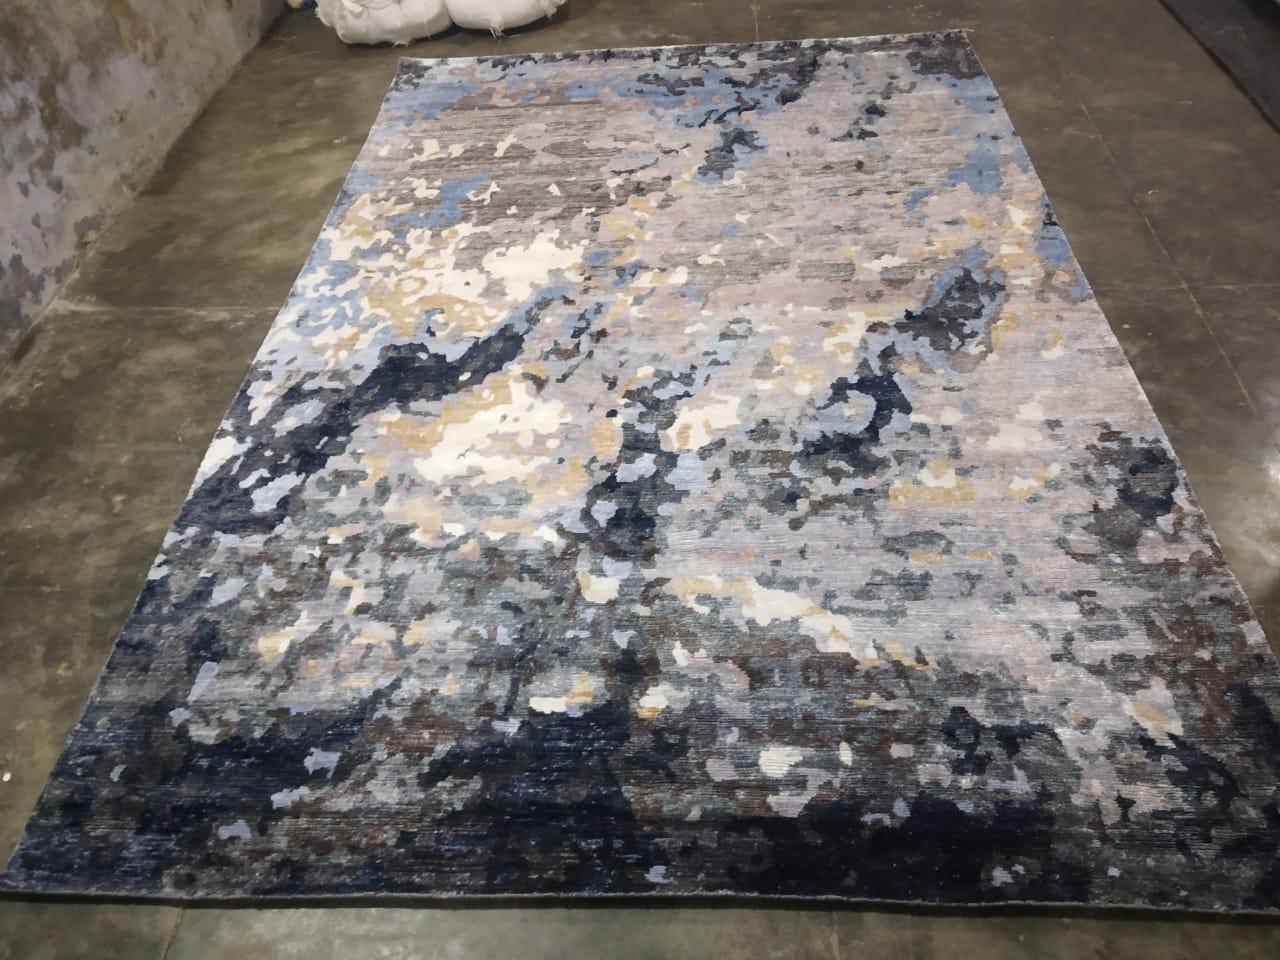 New rug with a beautiful modern abstract design and blue, grey and light colors. Entirely hand knotted with silk and wool velvet on cotton foundation.